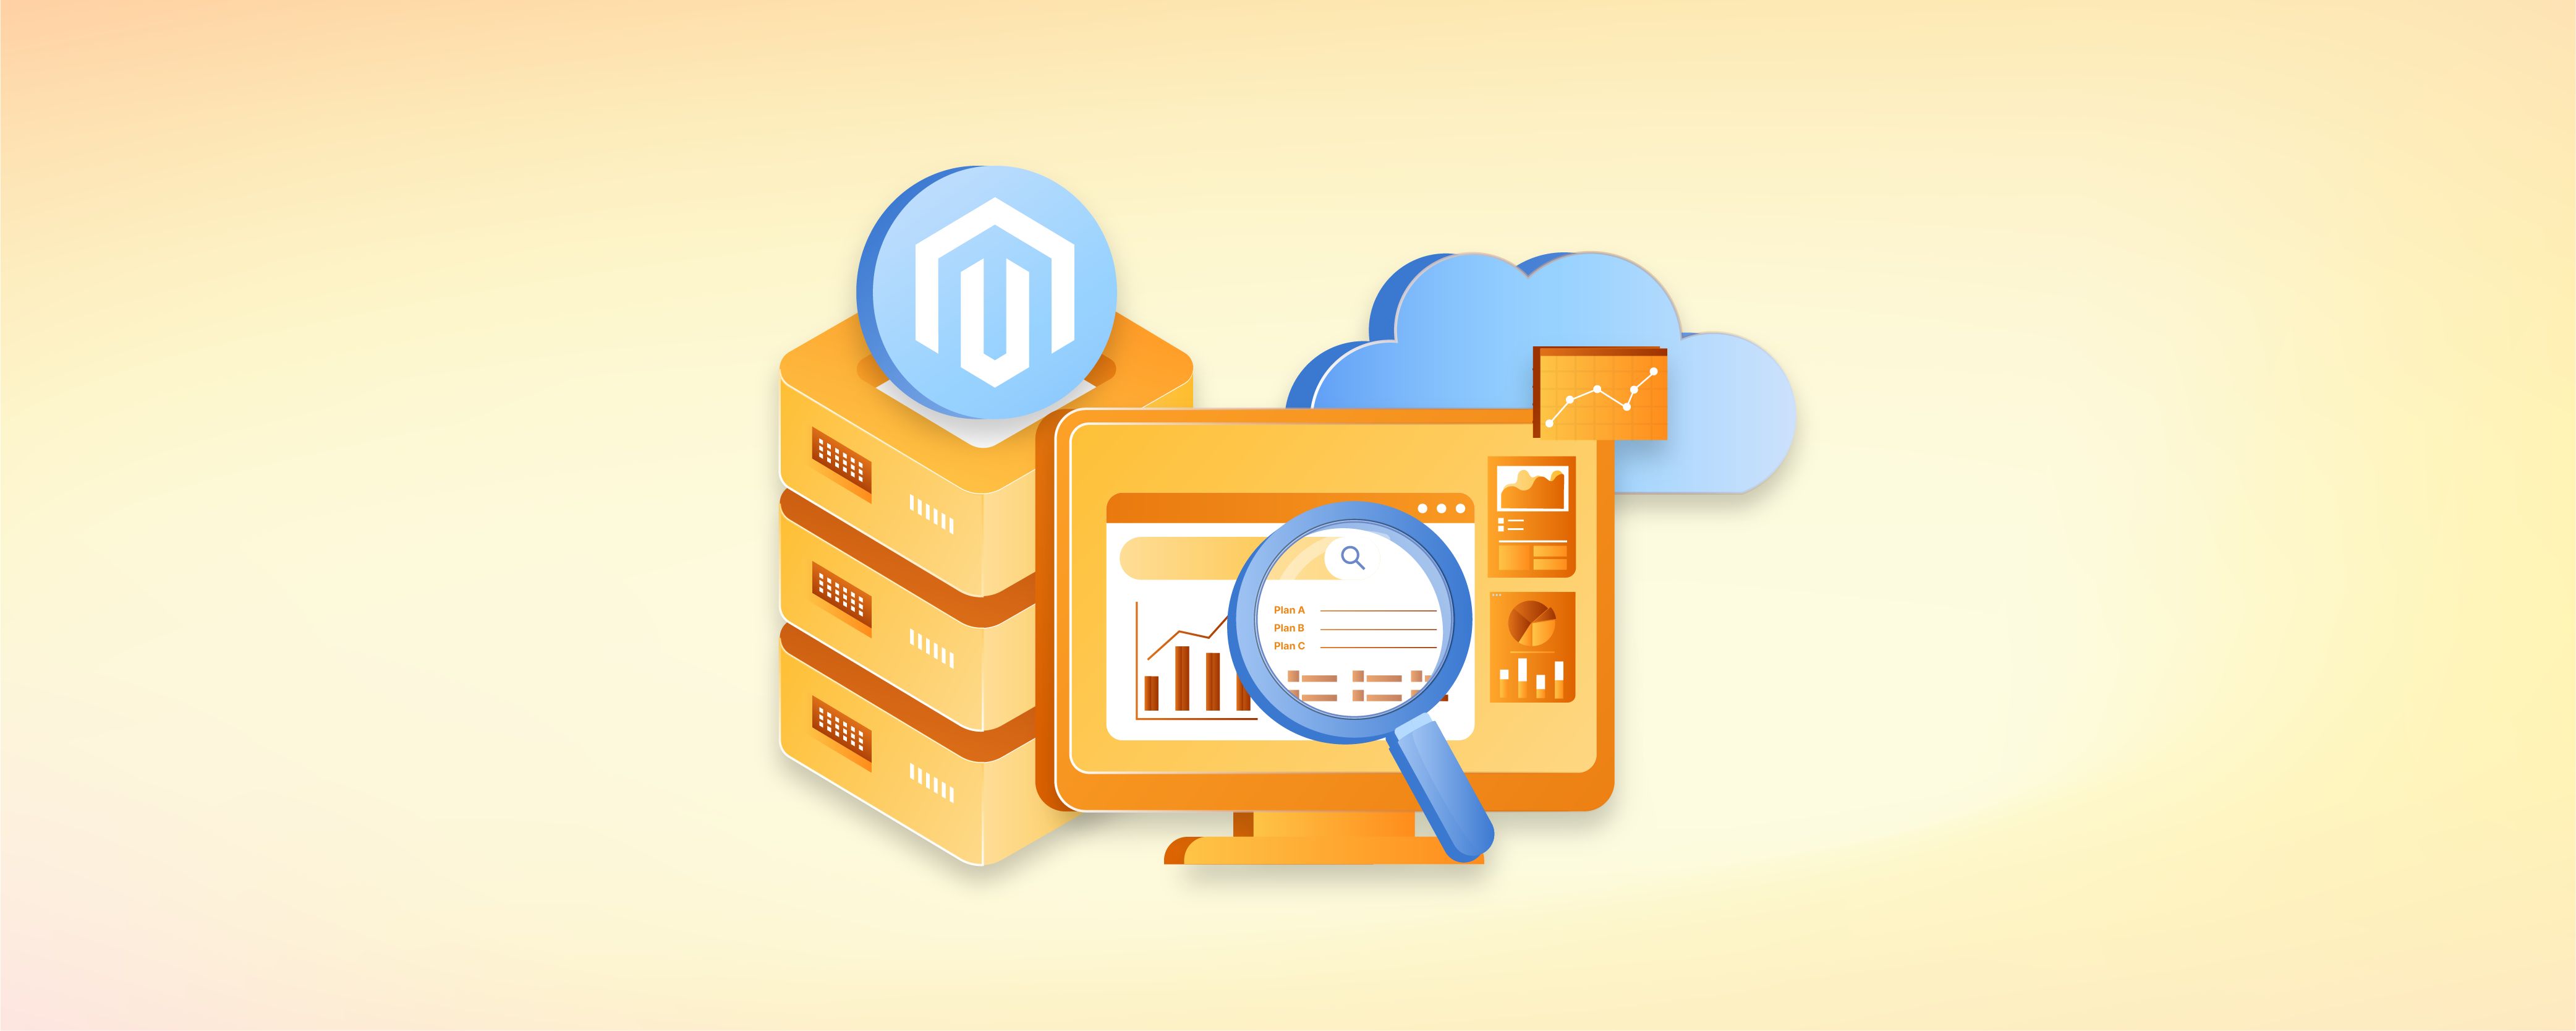 Choosing Magento Hosting Plans for Bandwidth and Traffic Needs